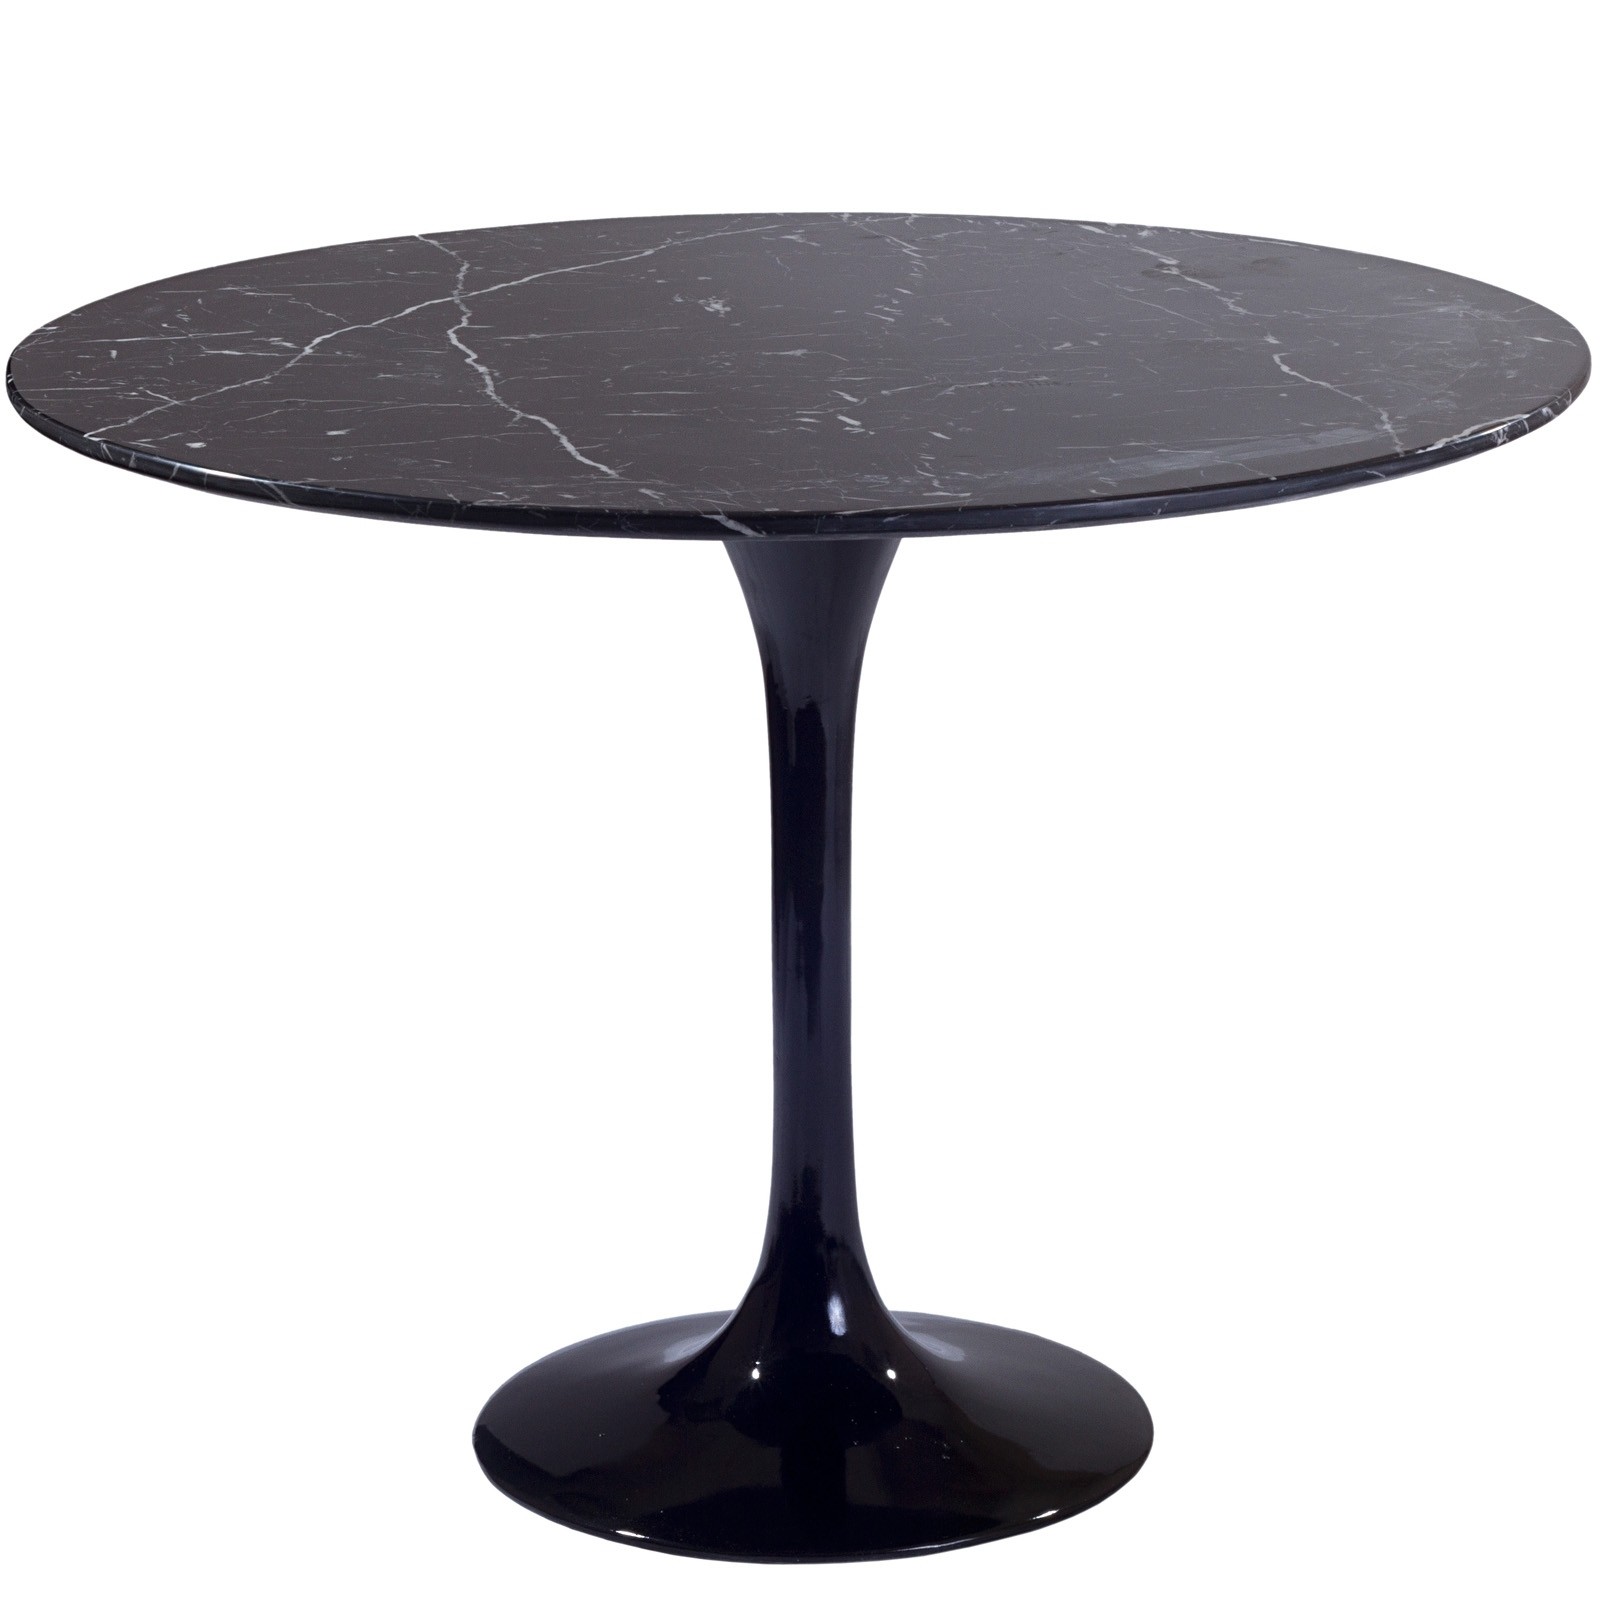 round black marble side table counter top plus curving height accent dining small dark wood battery powered light bulb for lamp nightstand slim console ikea blue lacquer room sets